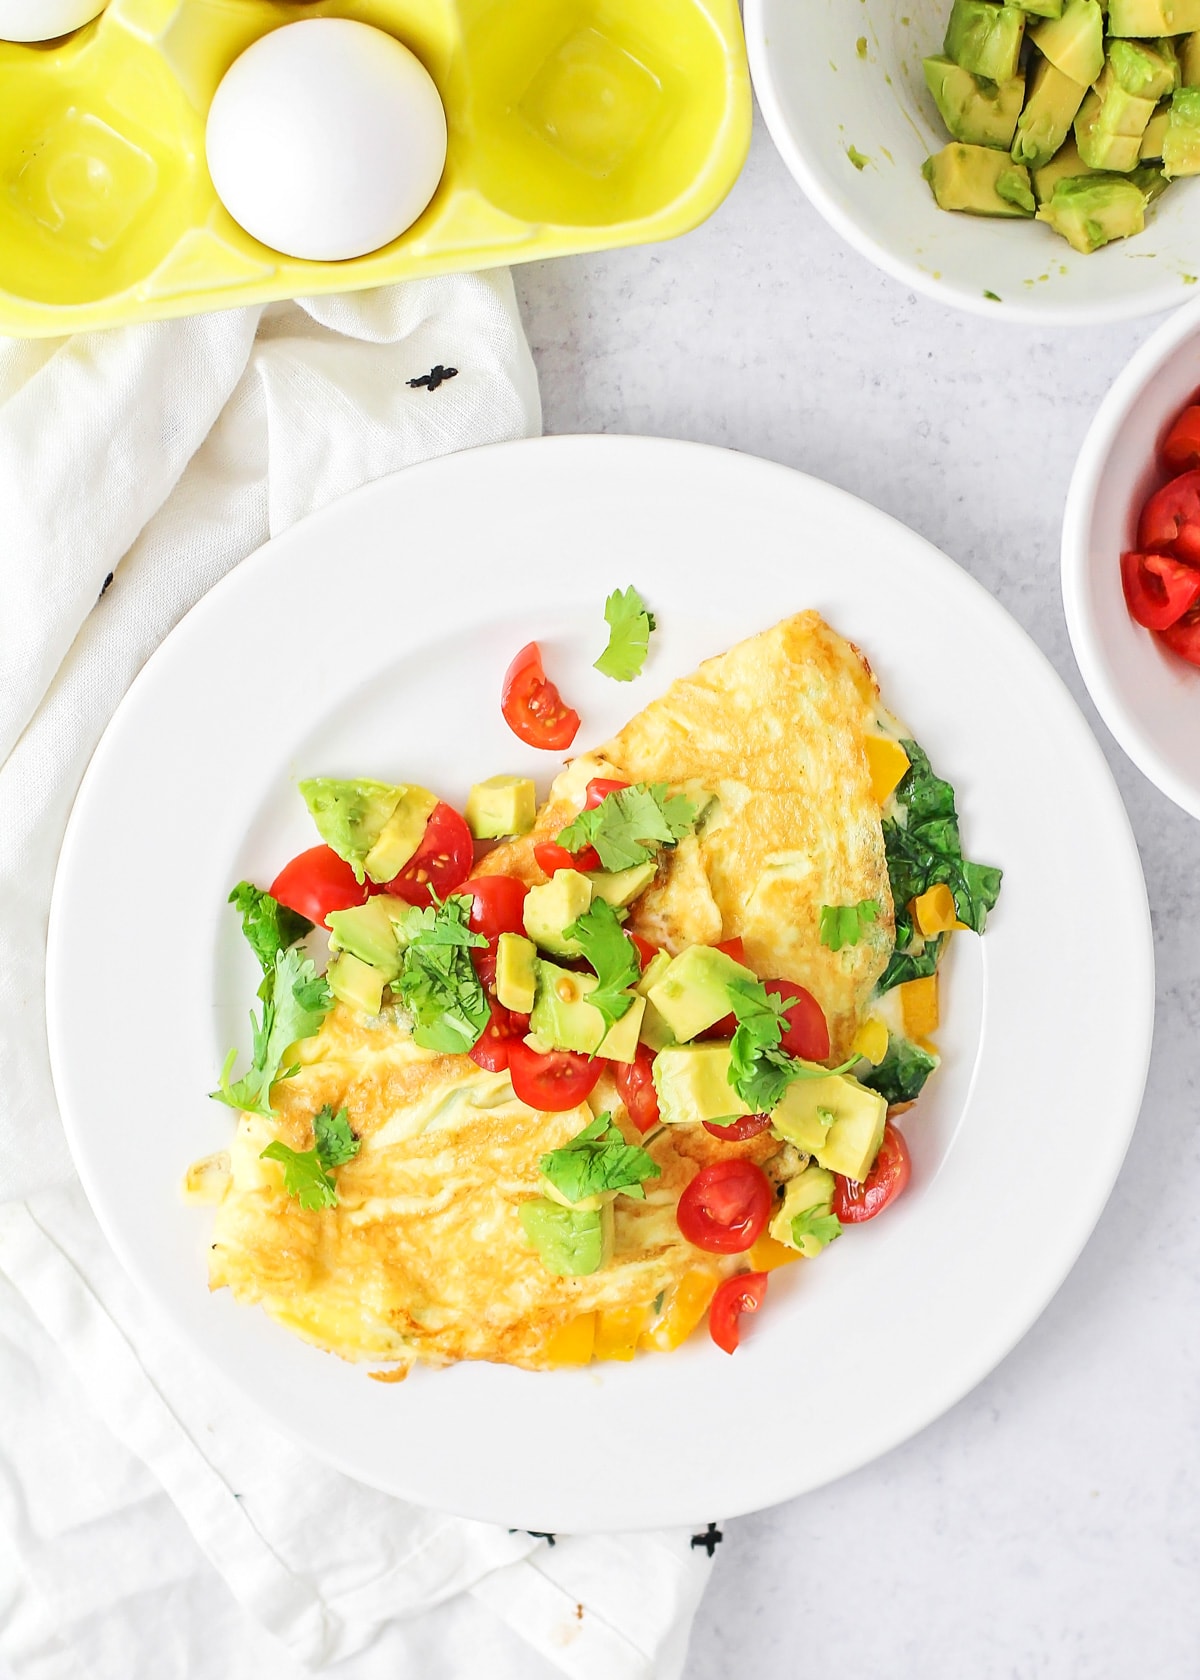 A cooked omelette topped with avocado, tomato, and cilantro.